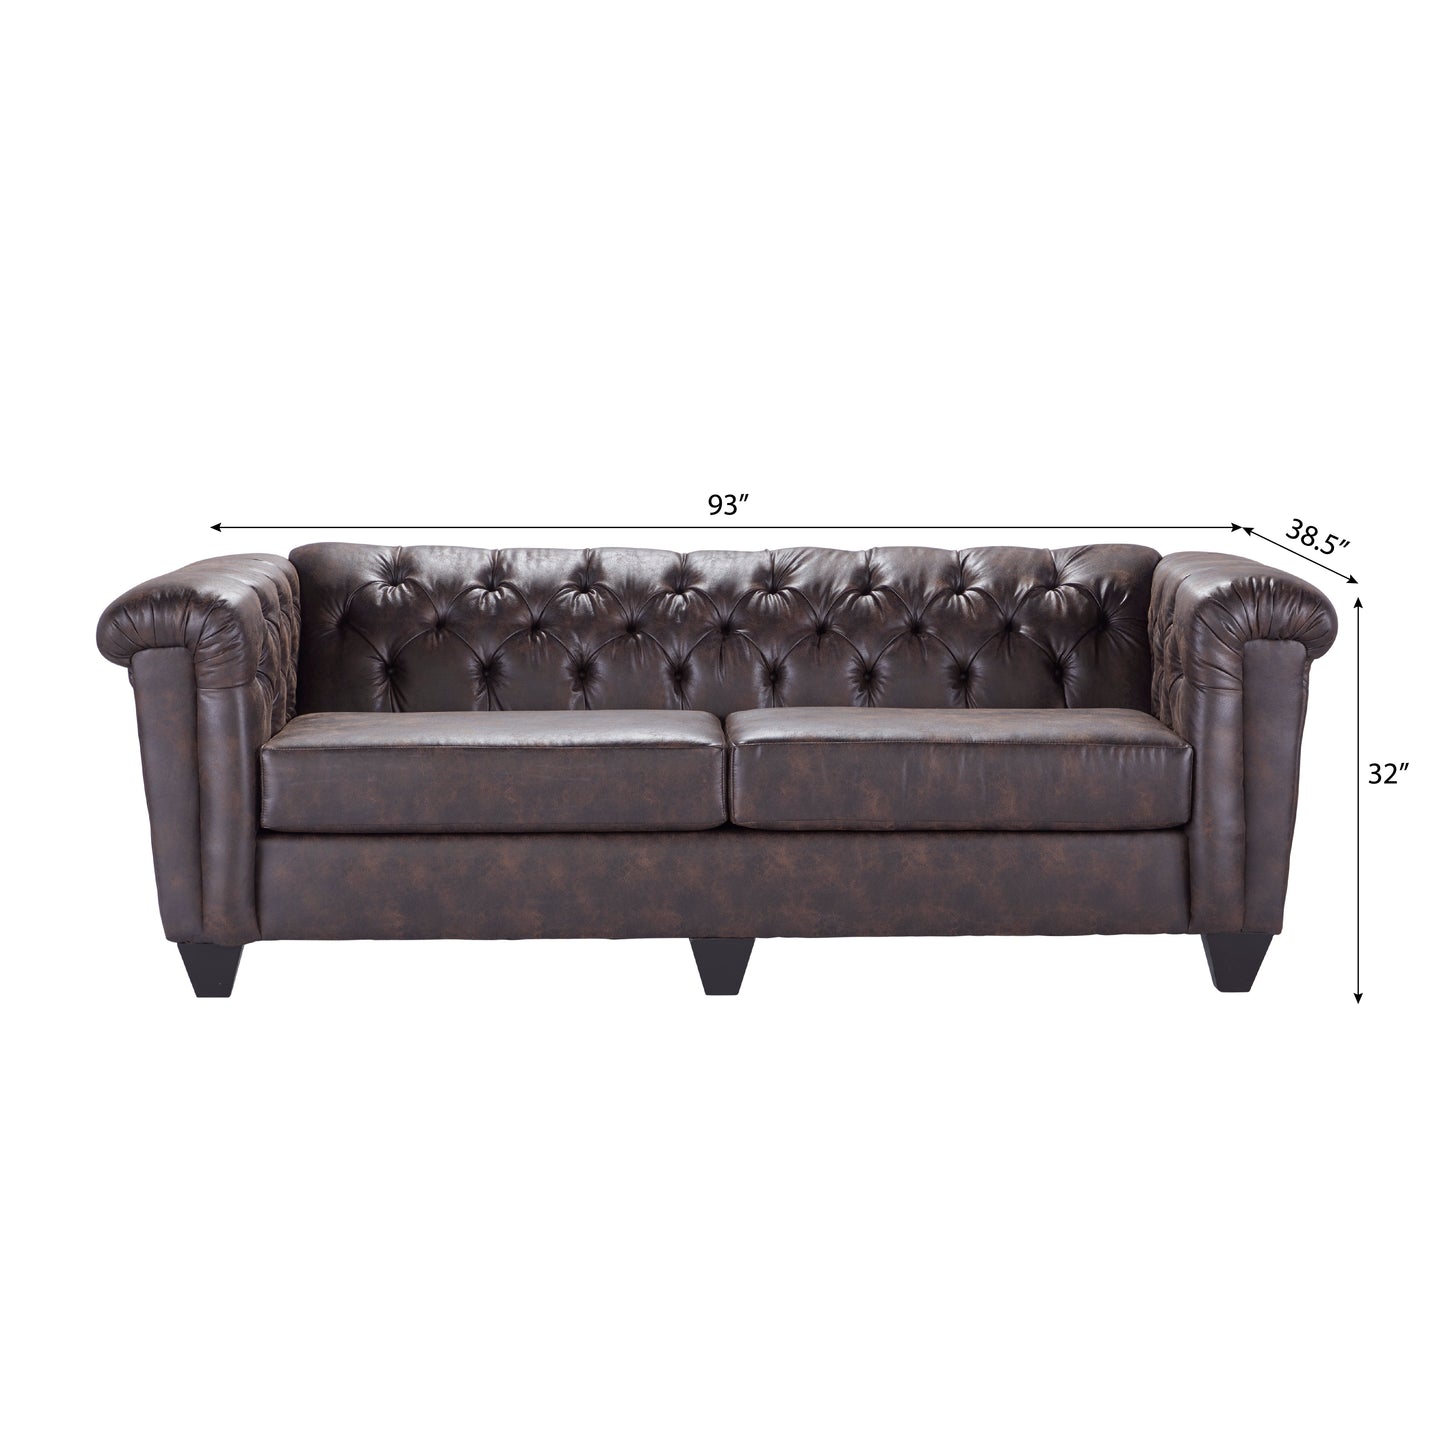 Horton Faux Leather Chesterfield Living Room Collection, Brownie